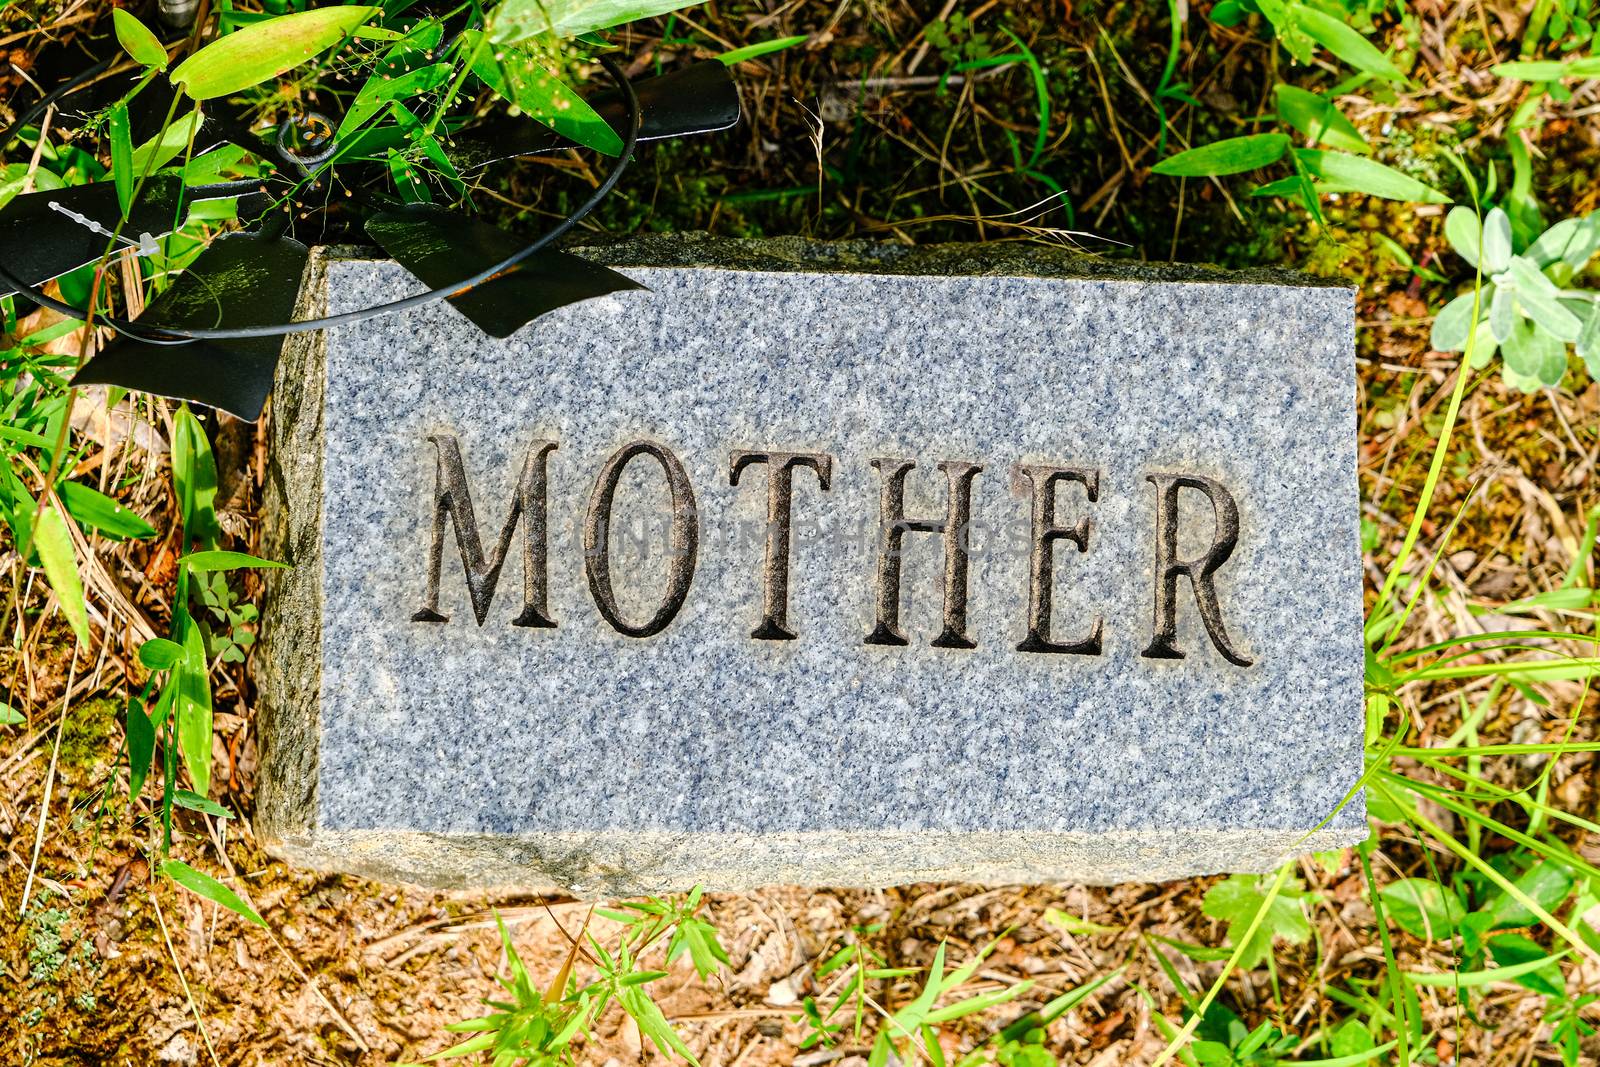 Mother Engraved on a Granite Grave Marker in a Cemetery